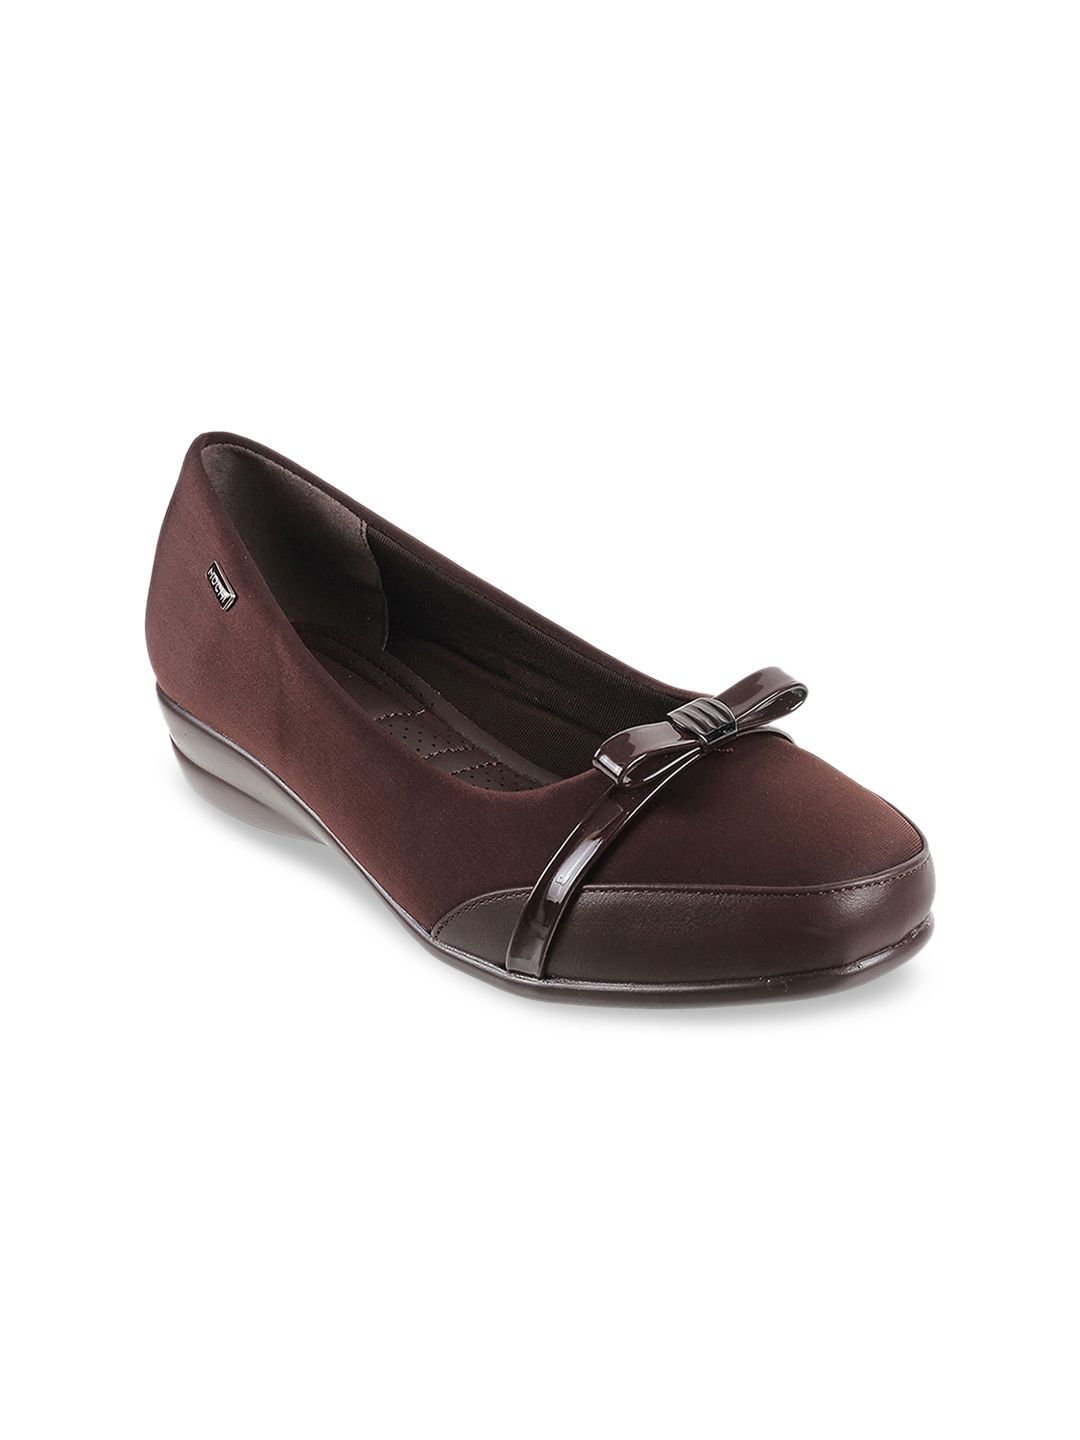 Mochi Brown Wedge Pumps with Bows Price in India